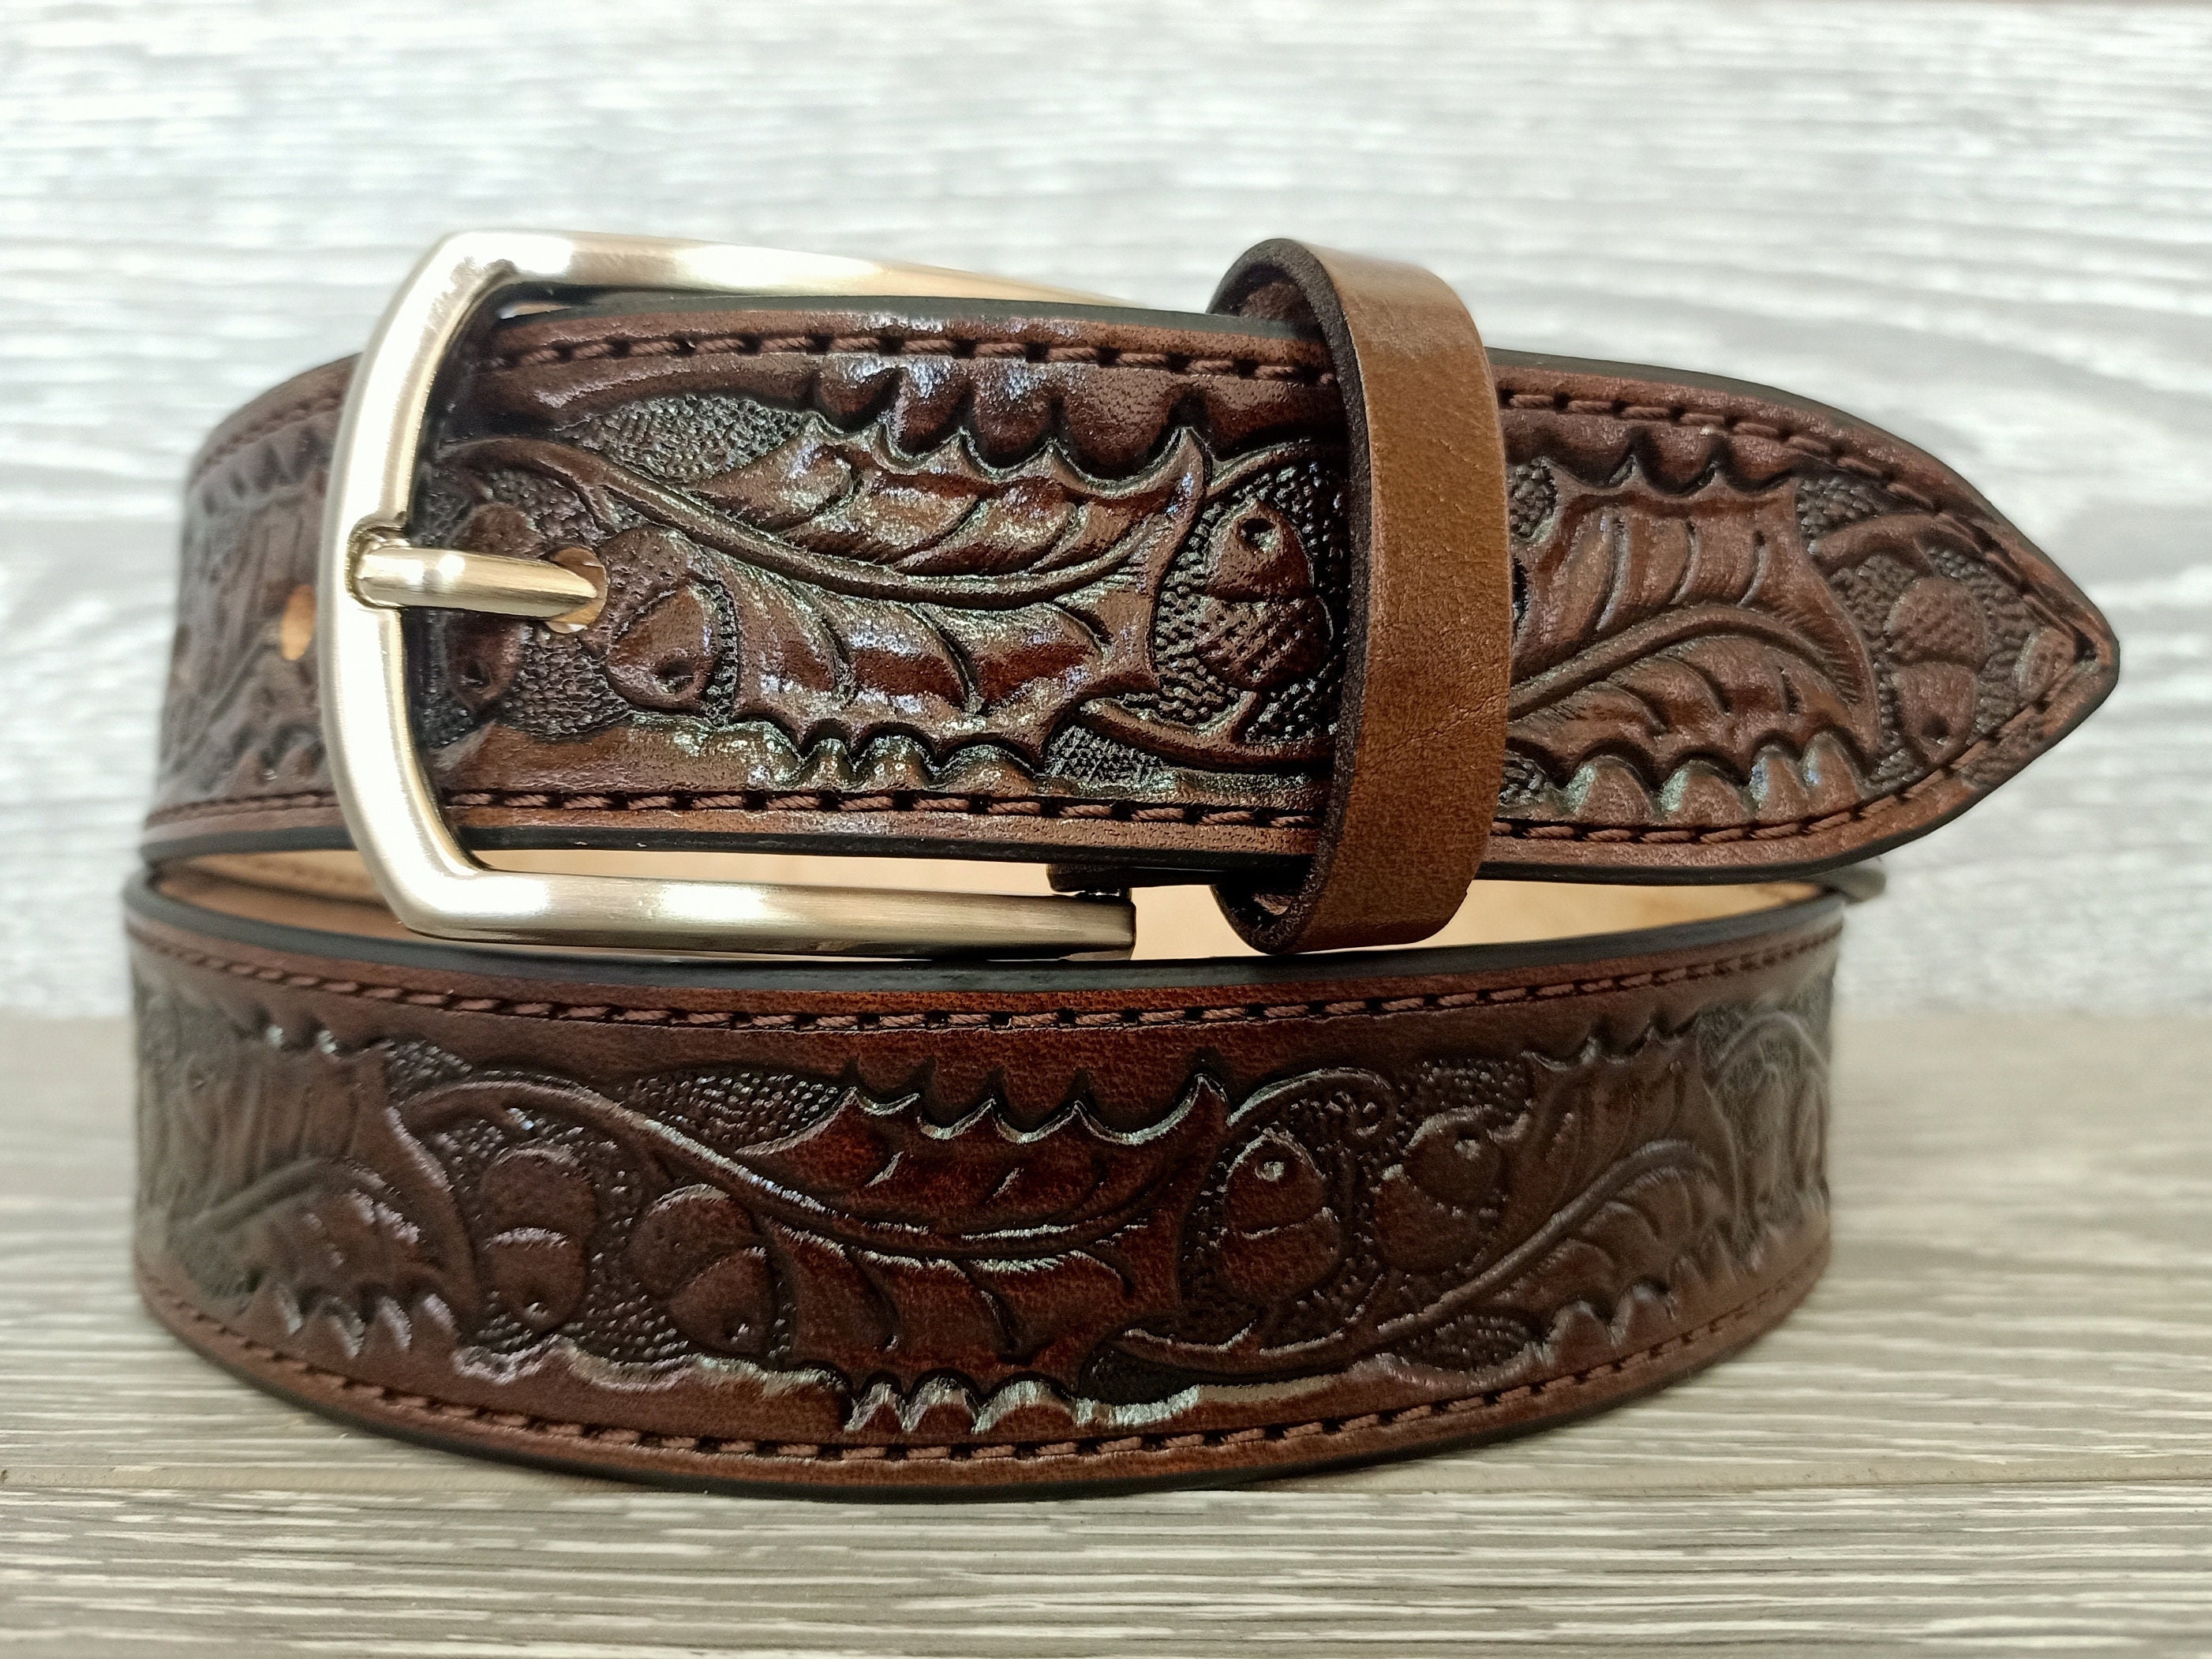 Luxury Men's Leather Belt, Fashion Casual Belt With Buckle For